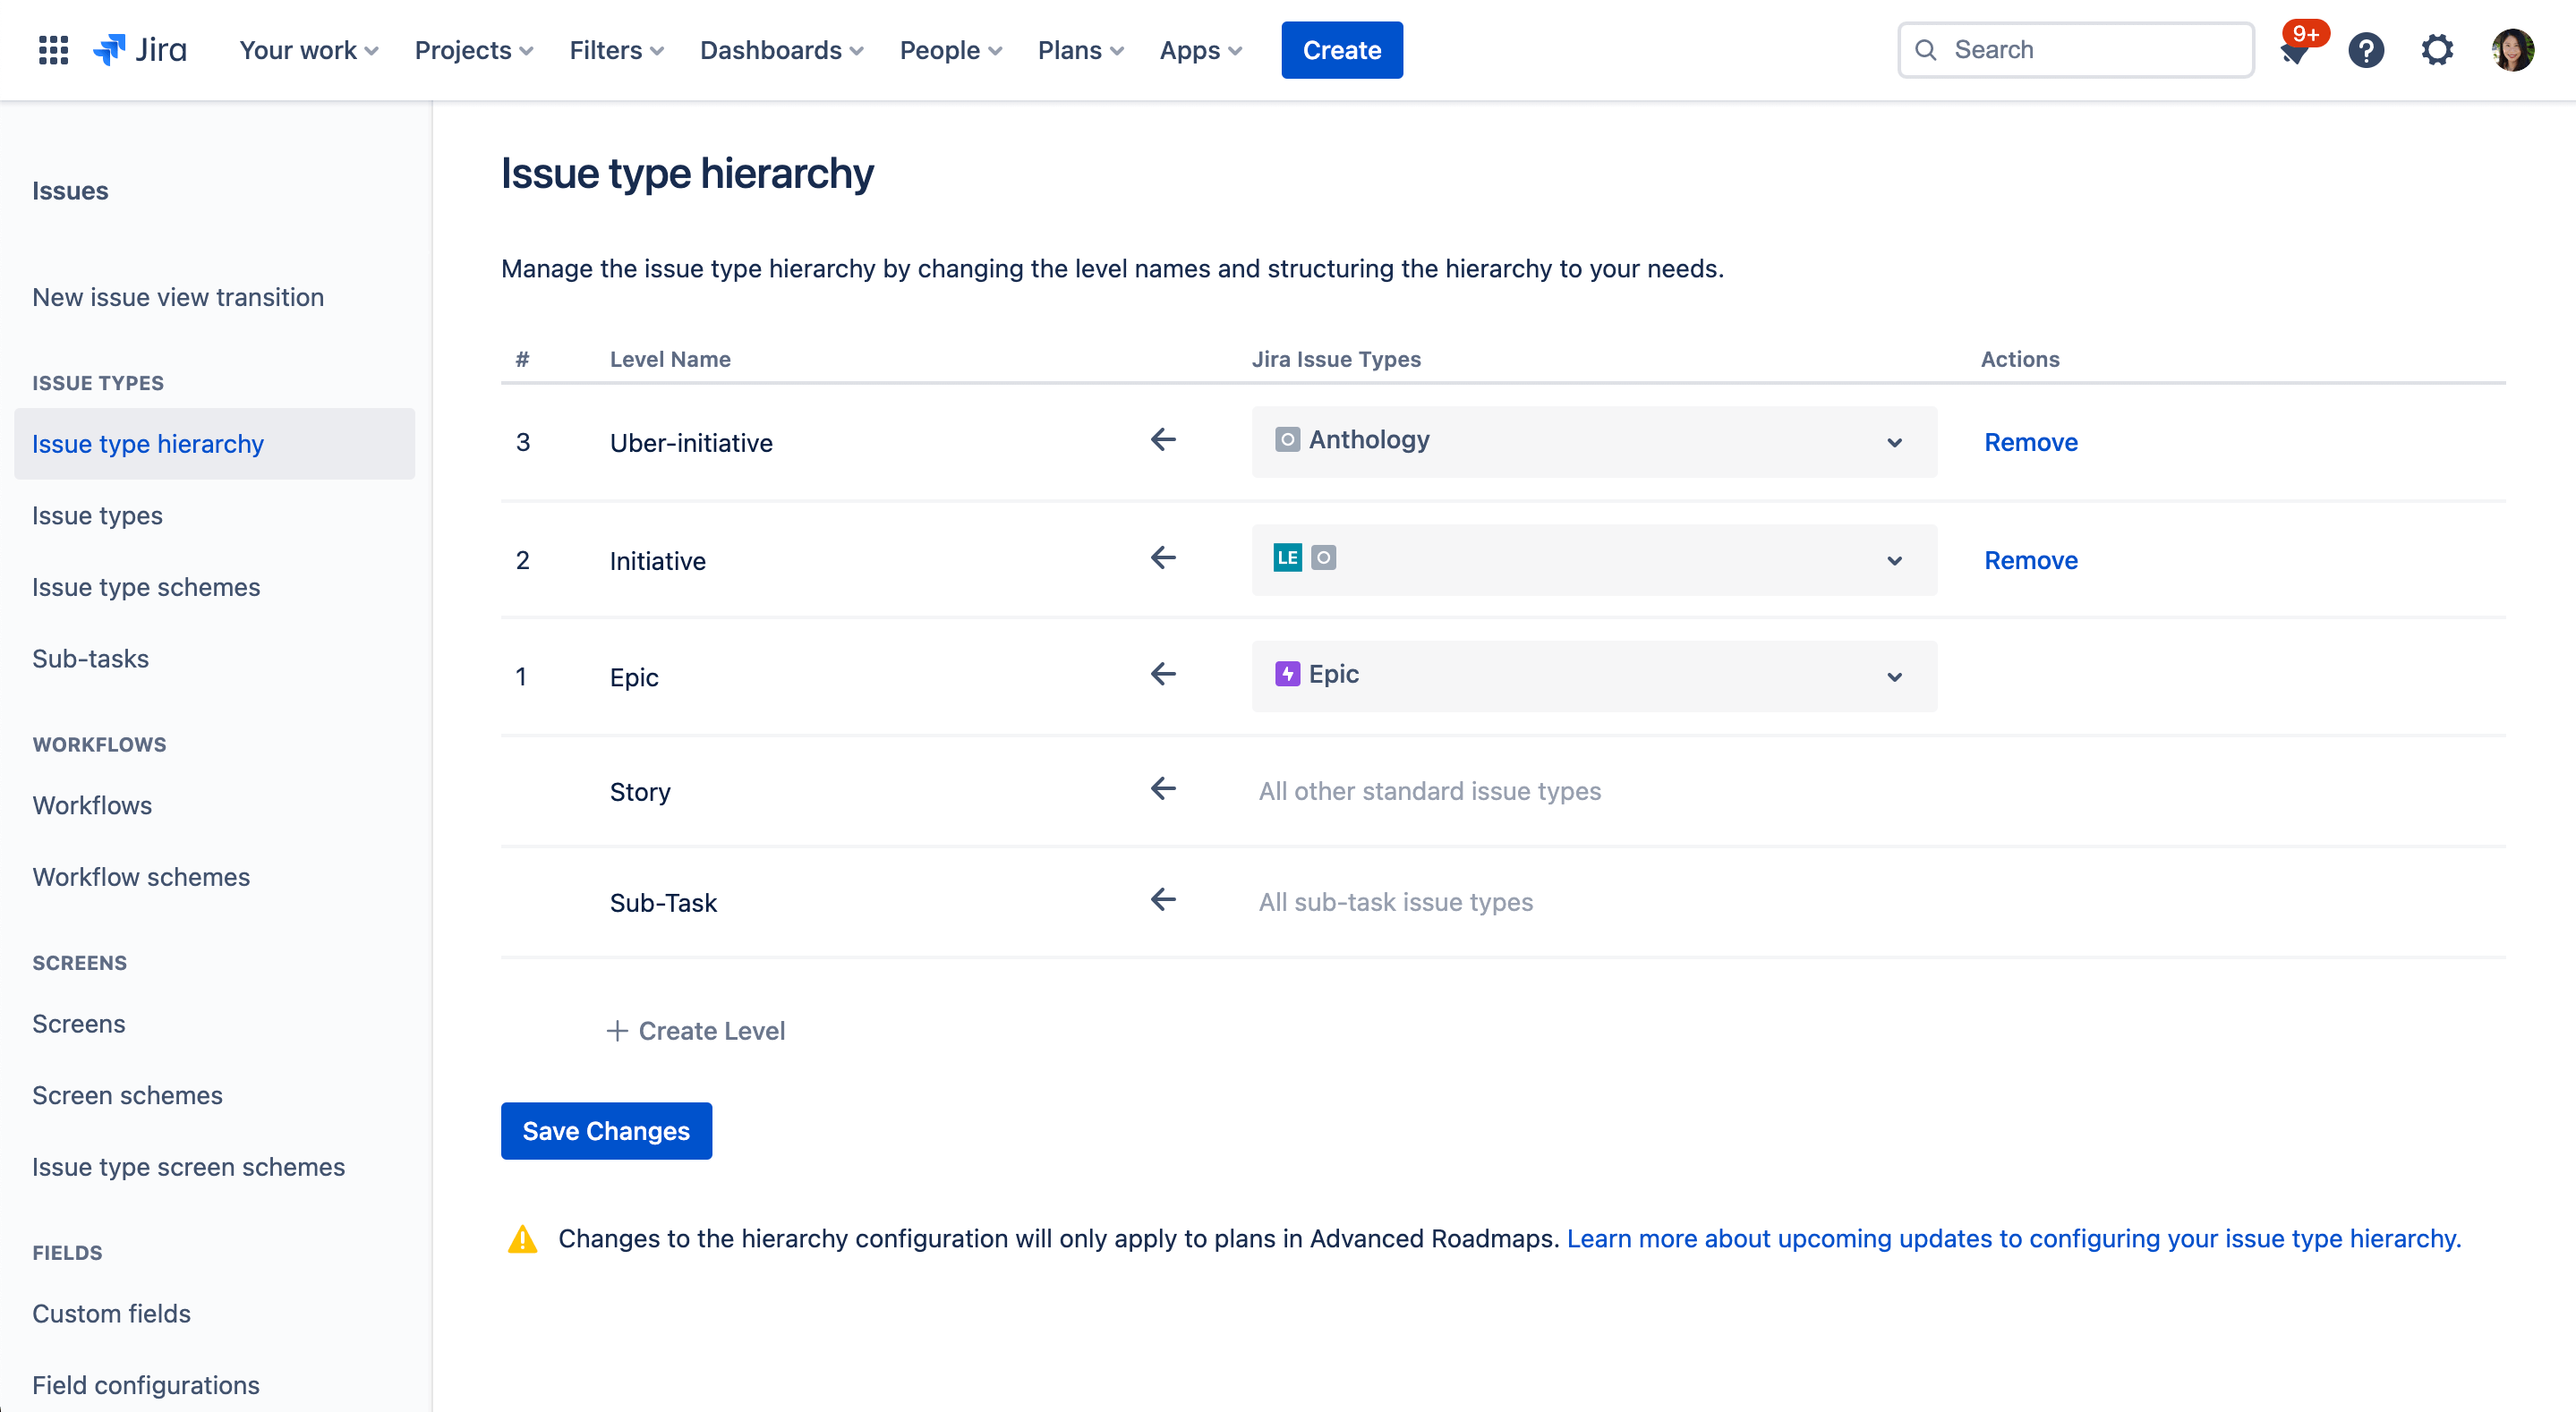 Issue type hierarchy settings page